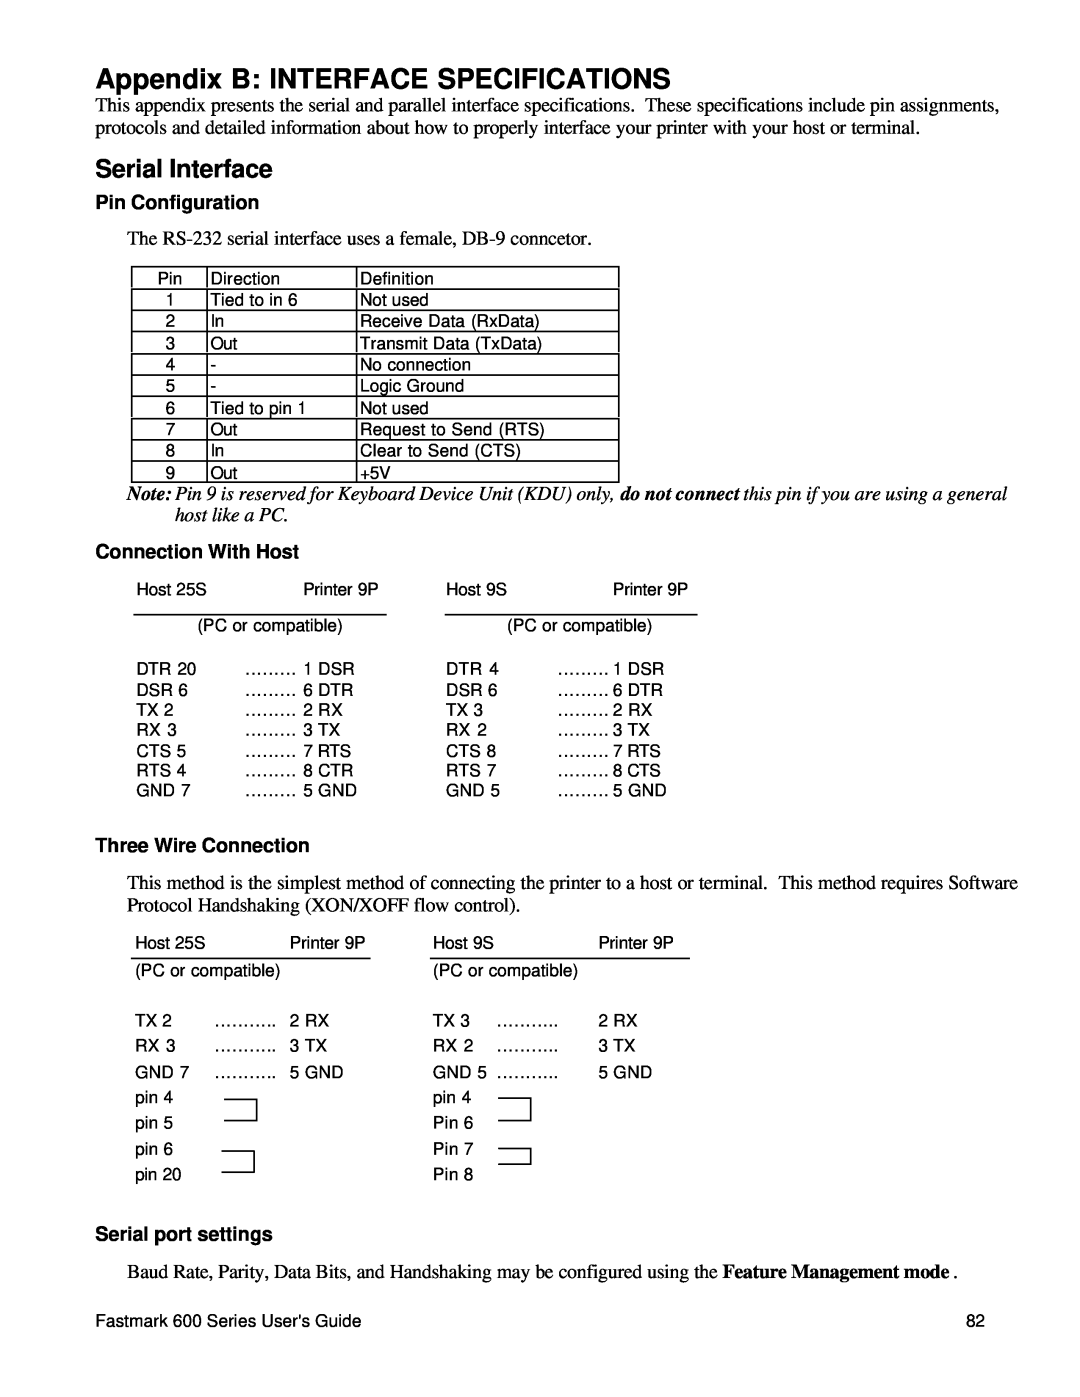 AMT Datasouth 600 manual Appendix B INTERFACE SPECIFICATIONS, Serial Interface, Pin Configuration, Connection With Host 